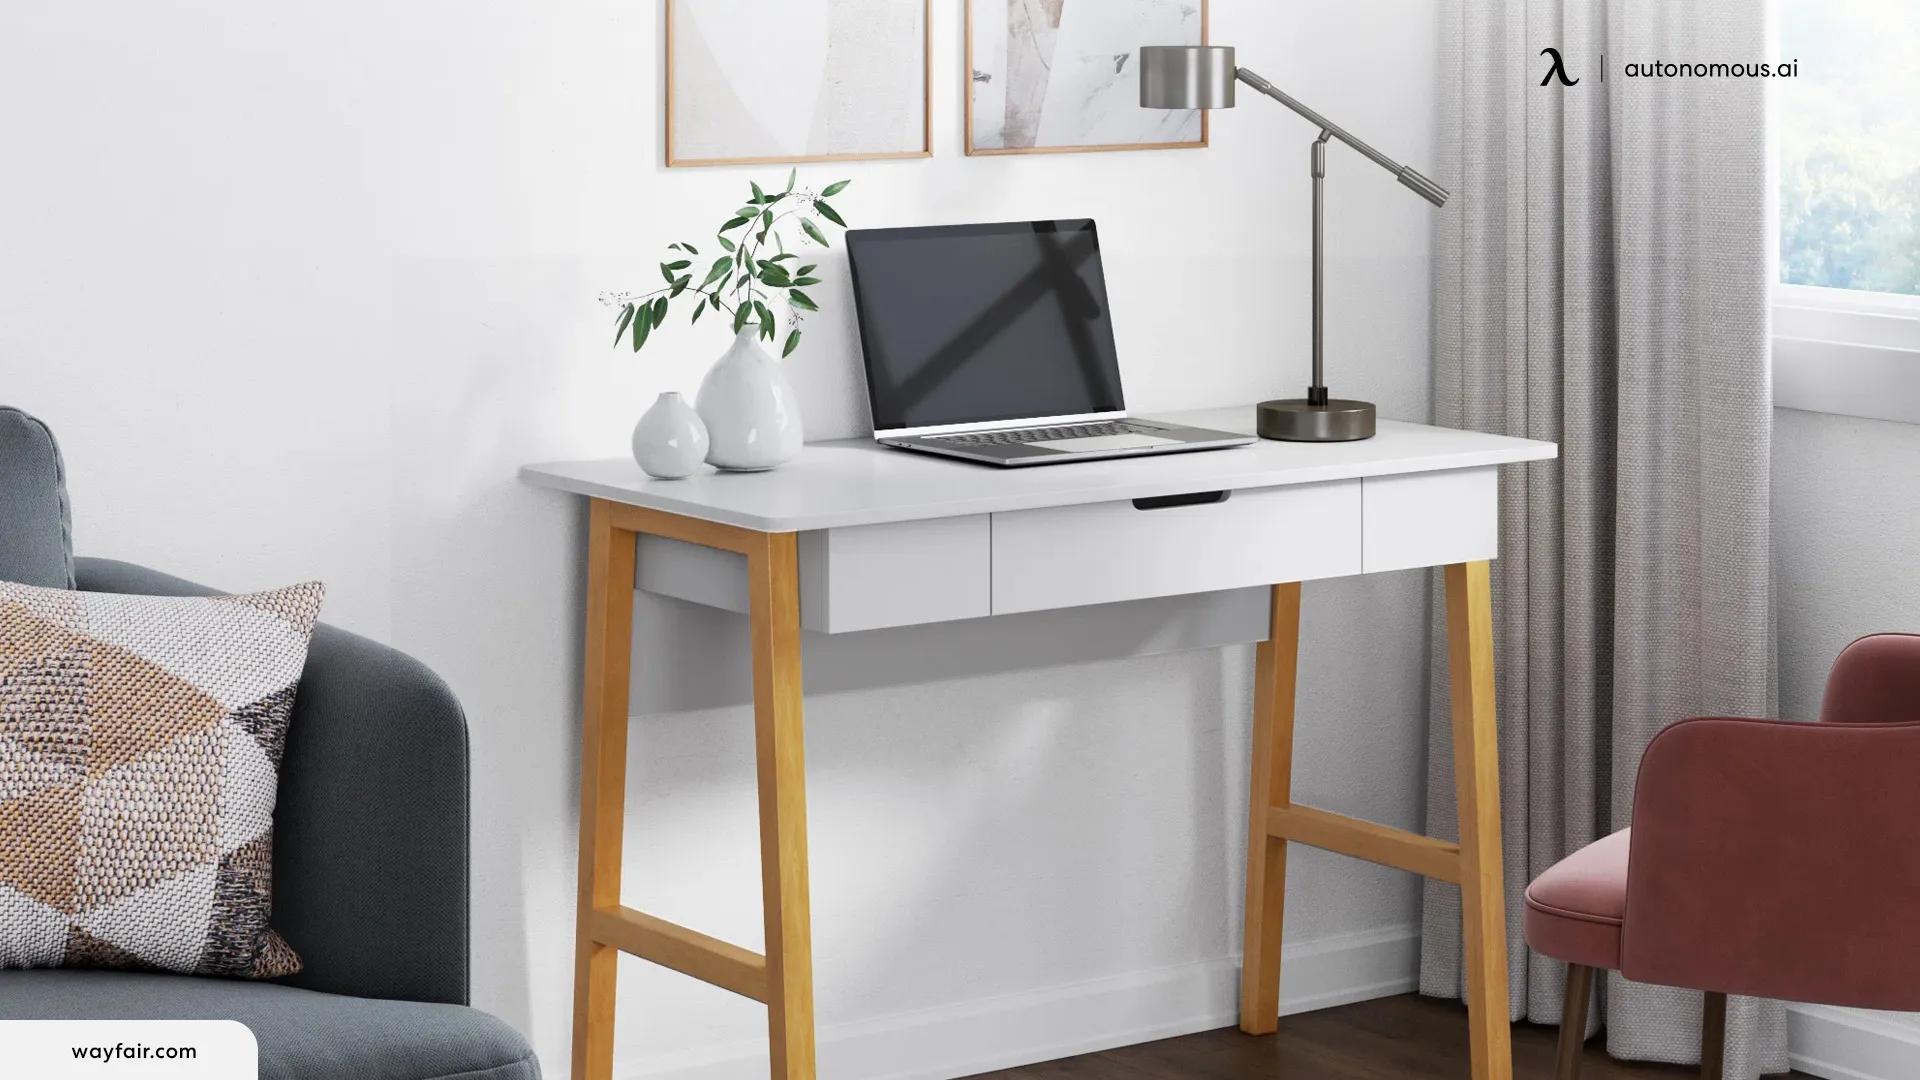 Considerations for Your DIY Office Desk